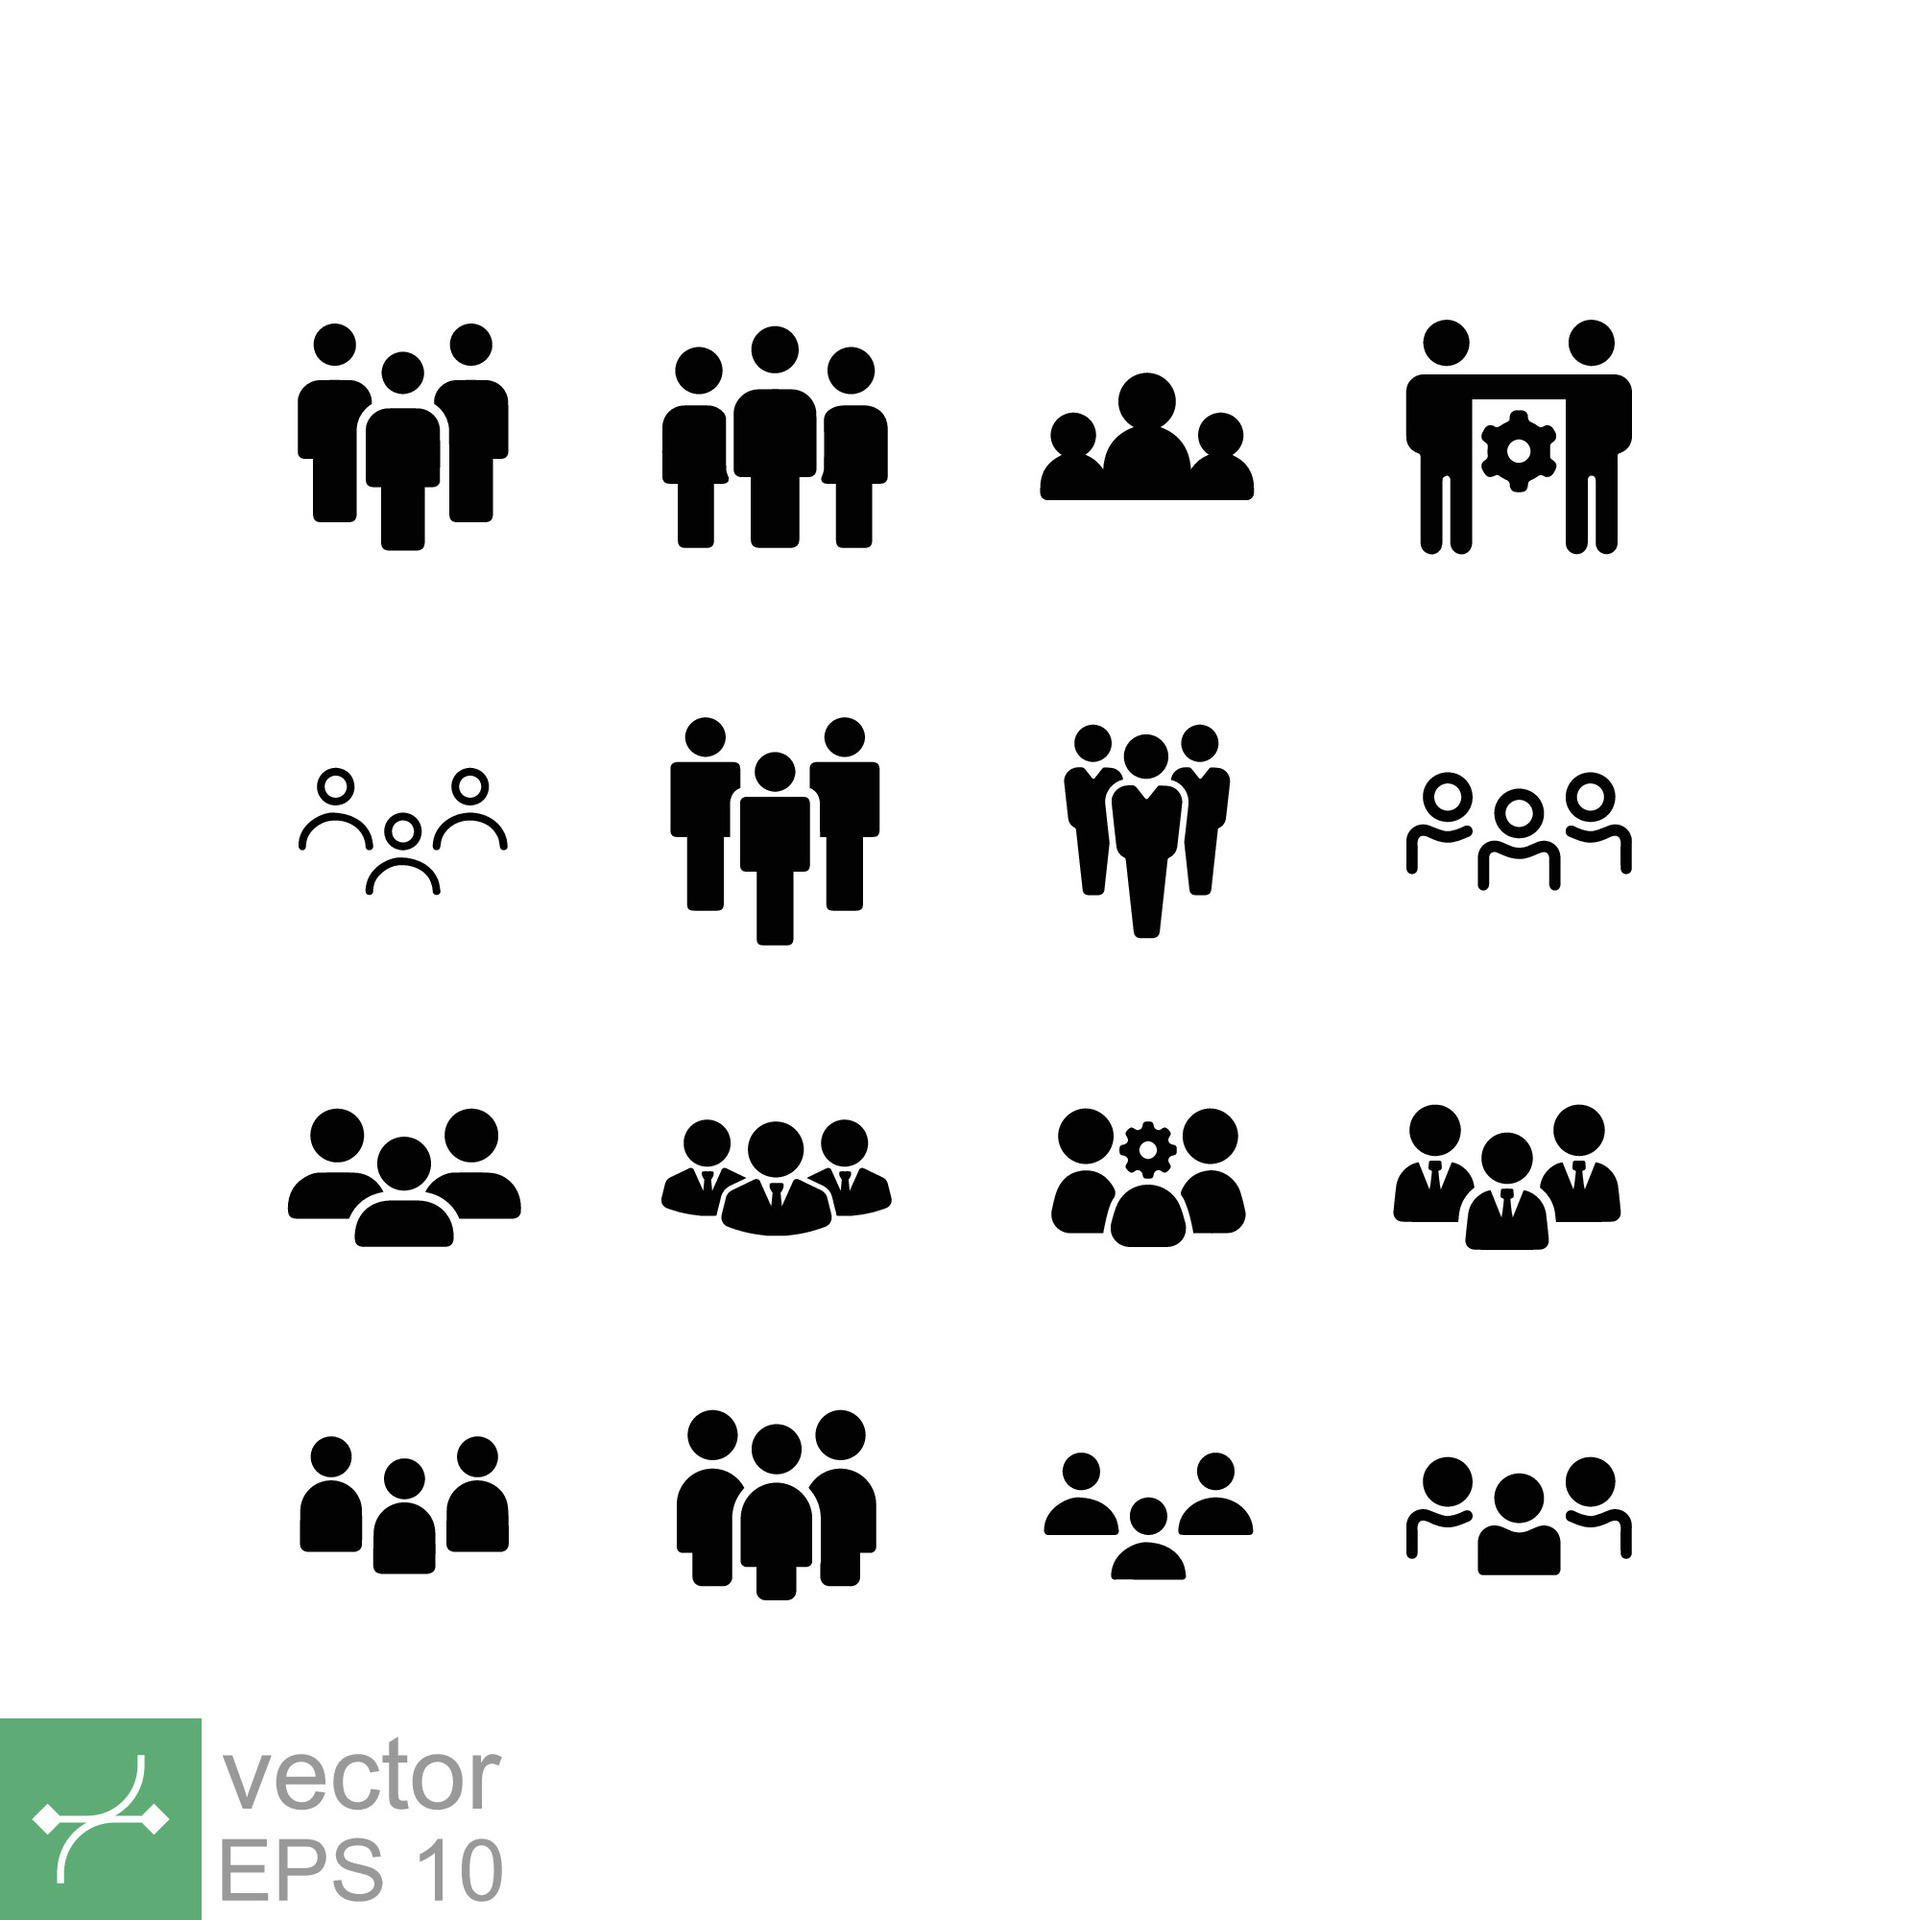 Groups of persons icon. Business team person, office teamwork people symbol  and work group isolated silhouette icons vector set Stock Vector